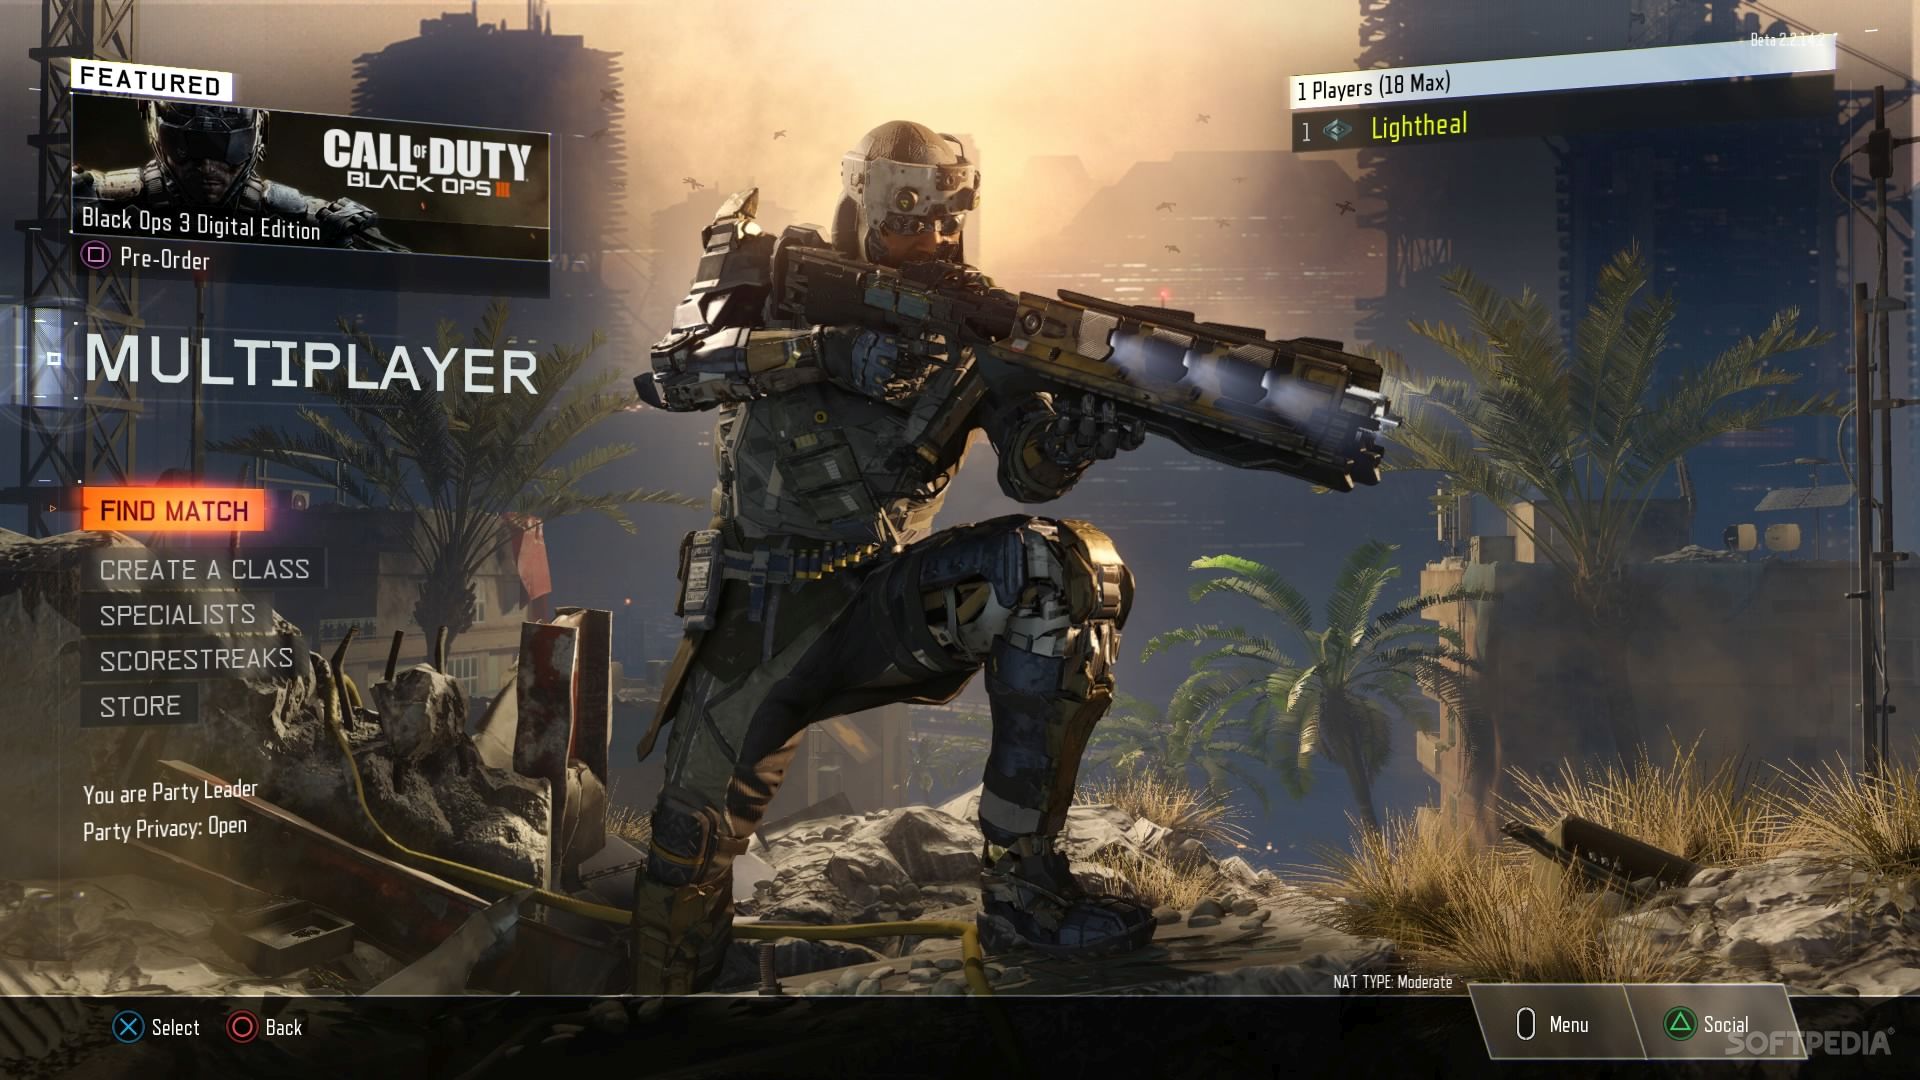 Call Duty: Black Ops 3 Xbox One Beta Code Solved via Workaround